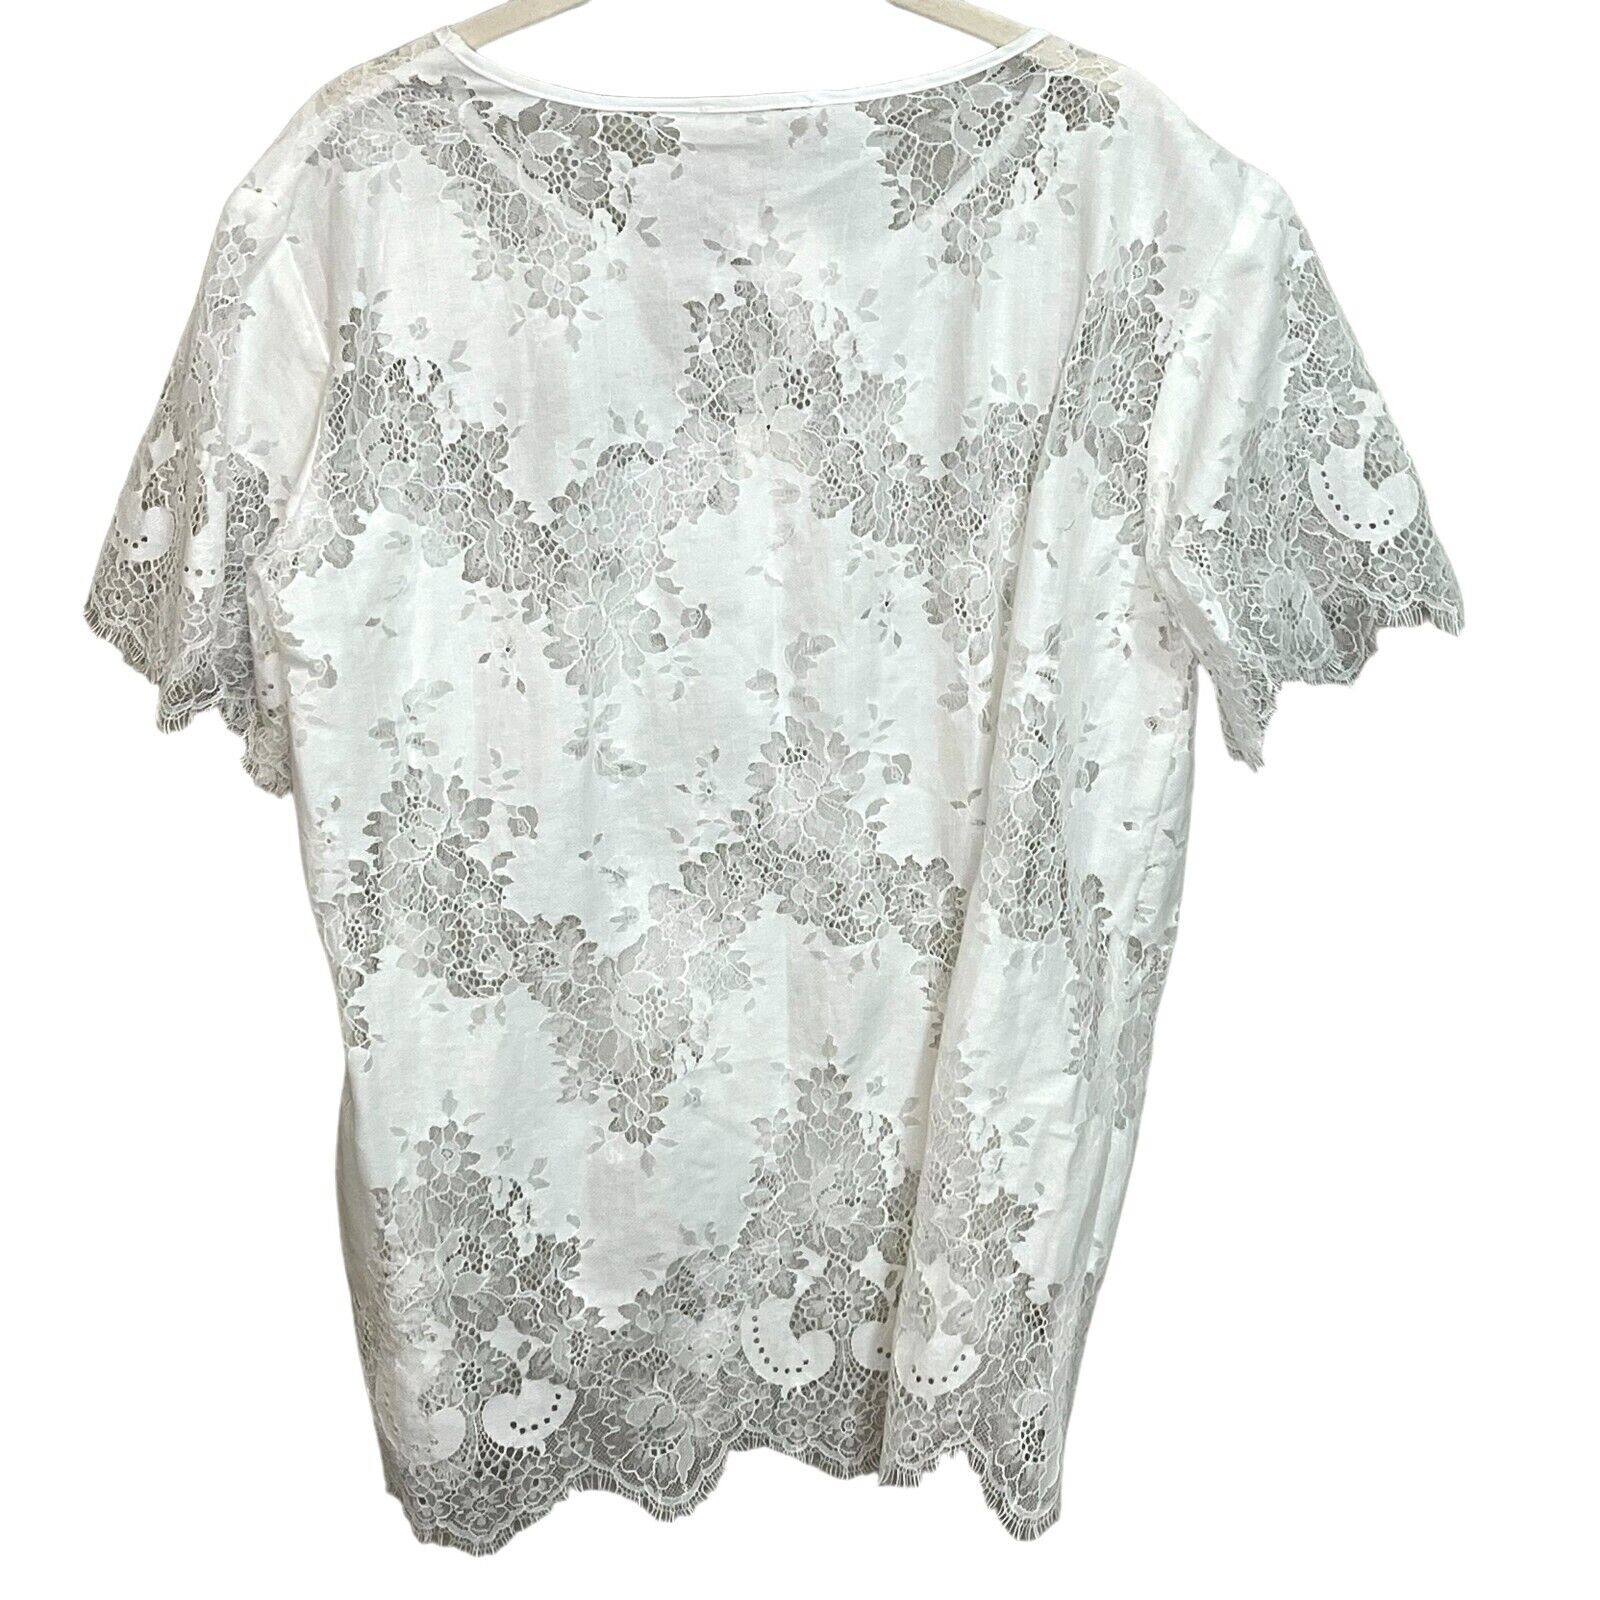 Gold Hawk Bright White Lace Short Sleeve Top Size Small NEW $178